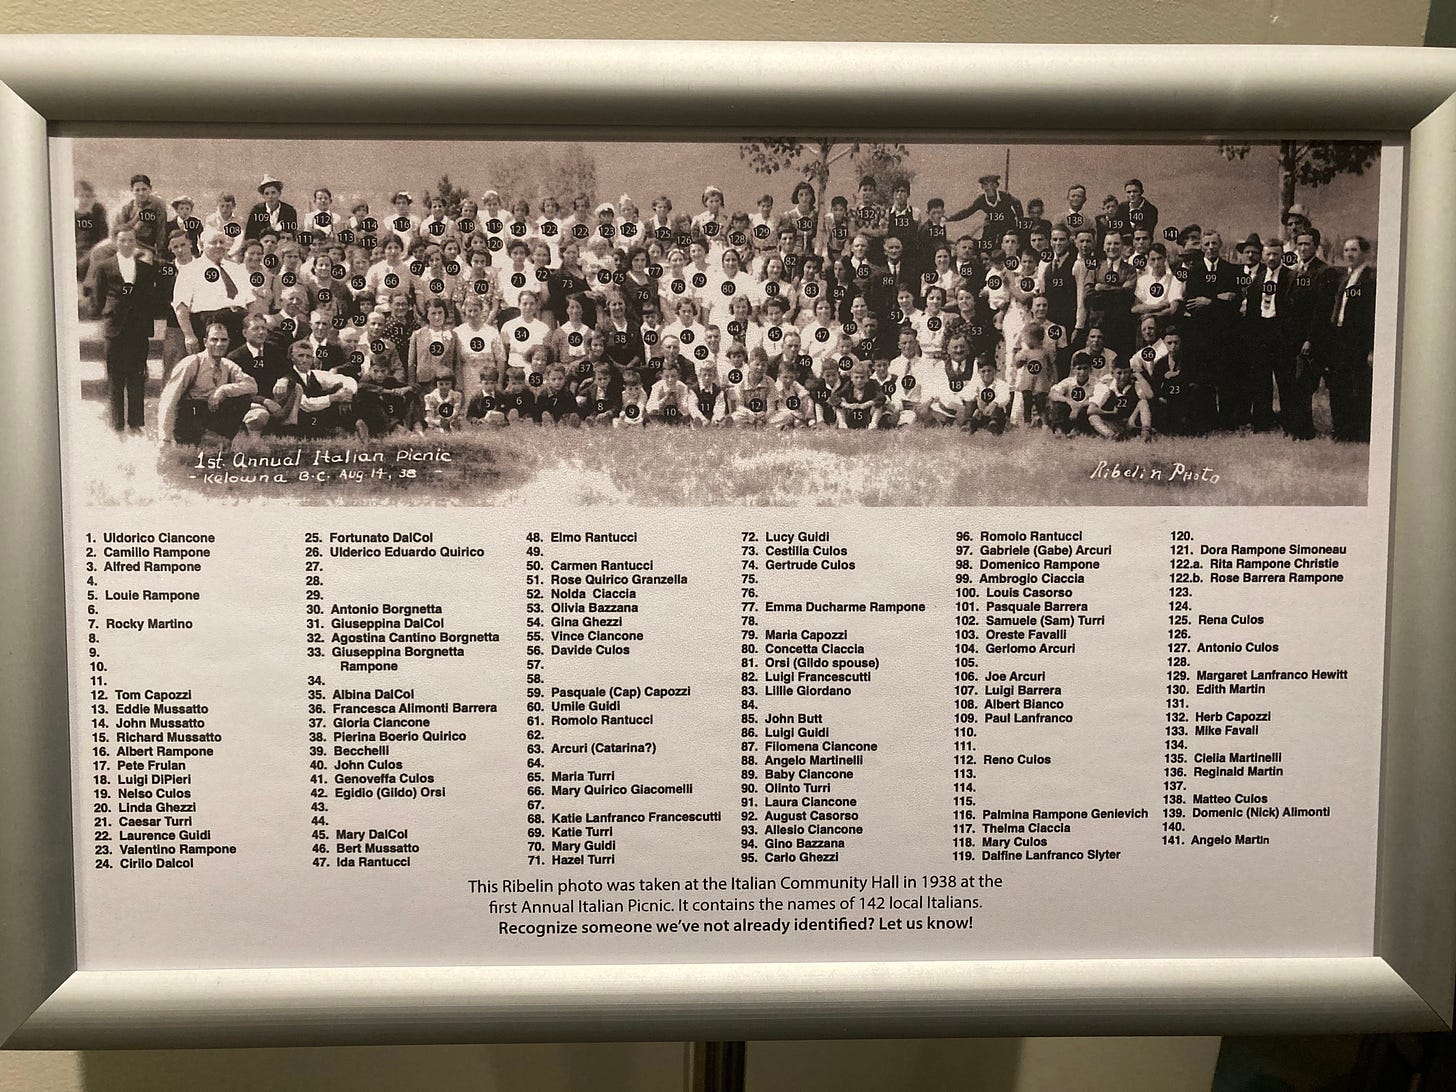 Museum exhibit featuring a historical photo of 141 people with names identifying individuals in the photograph.